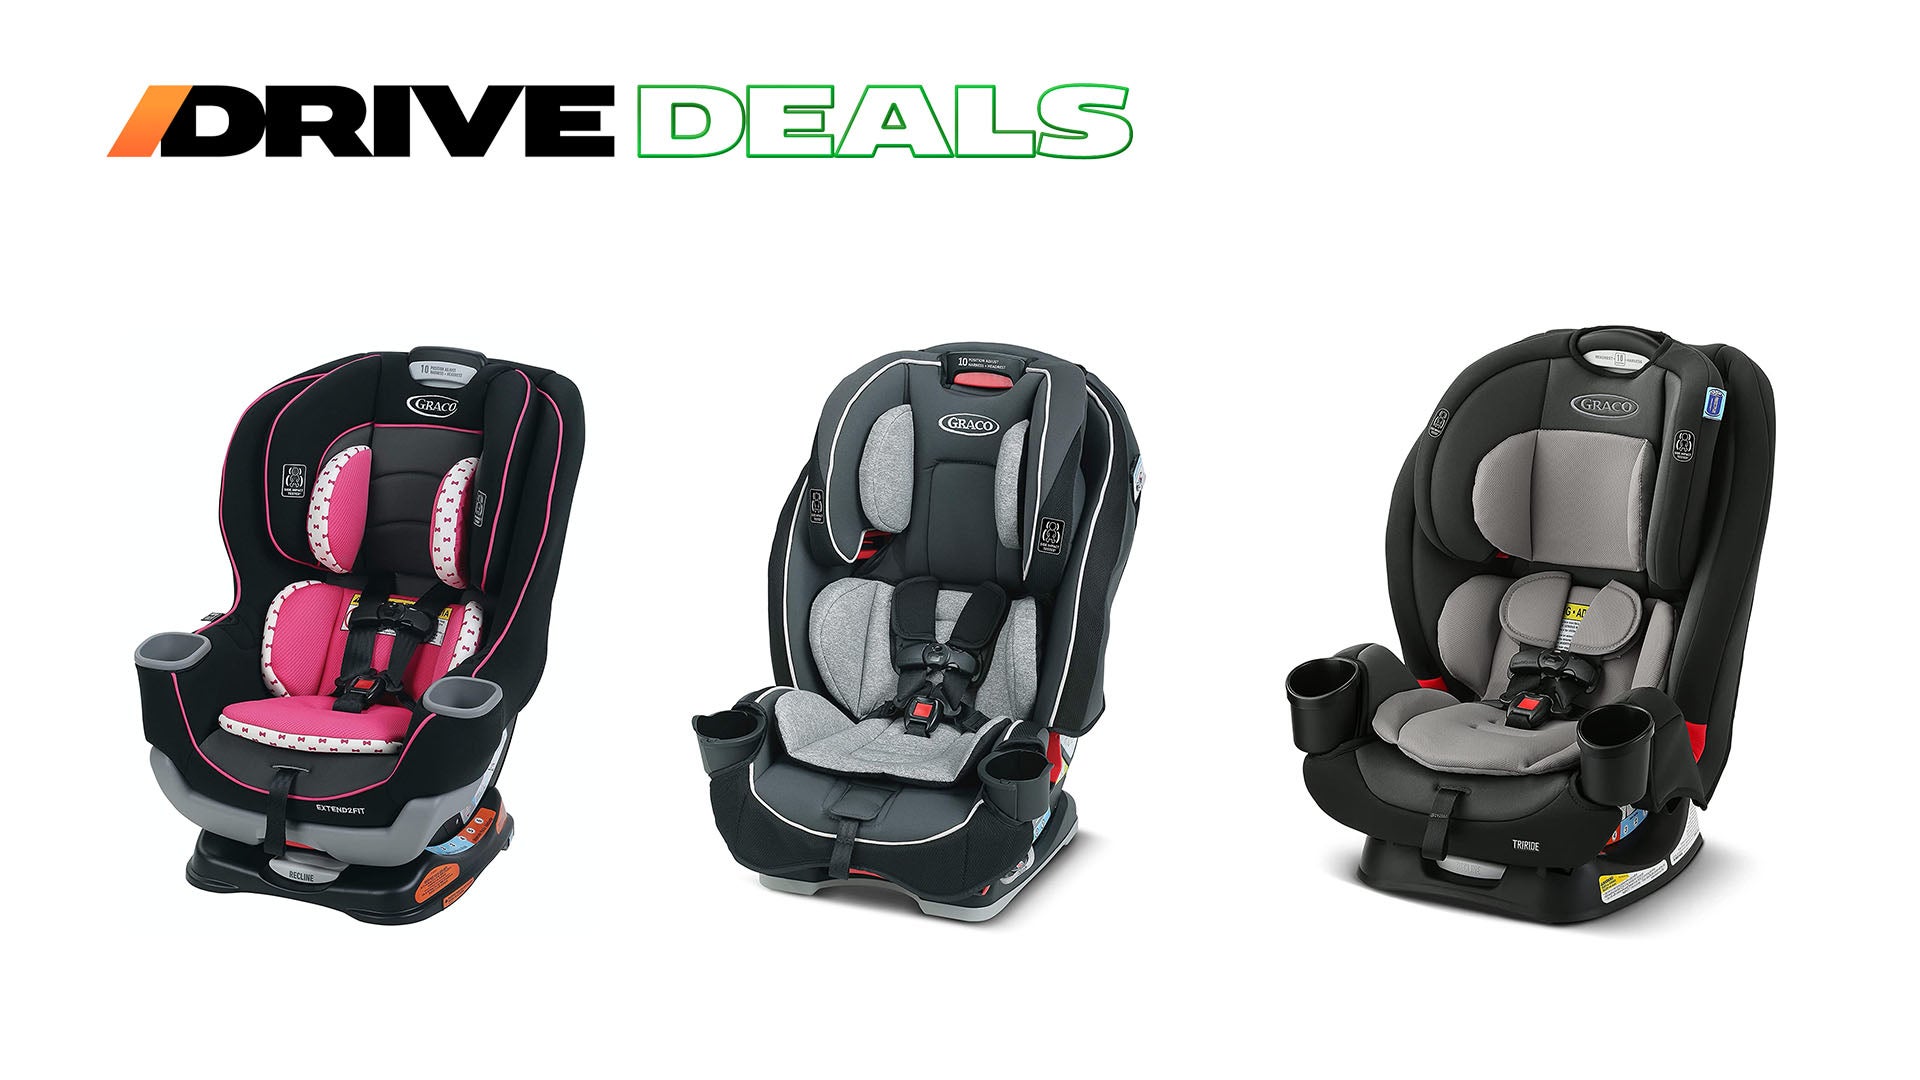 Save Big on Graco Car Seats With These Prime Day Deals